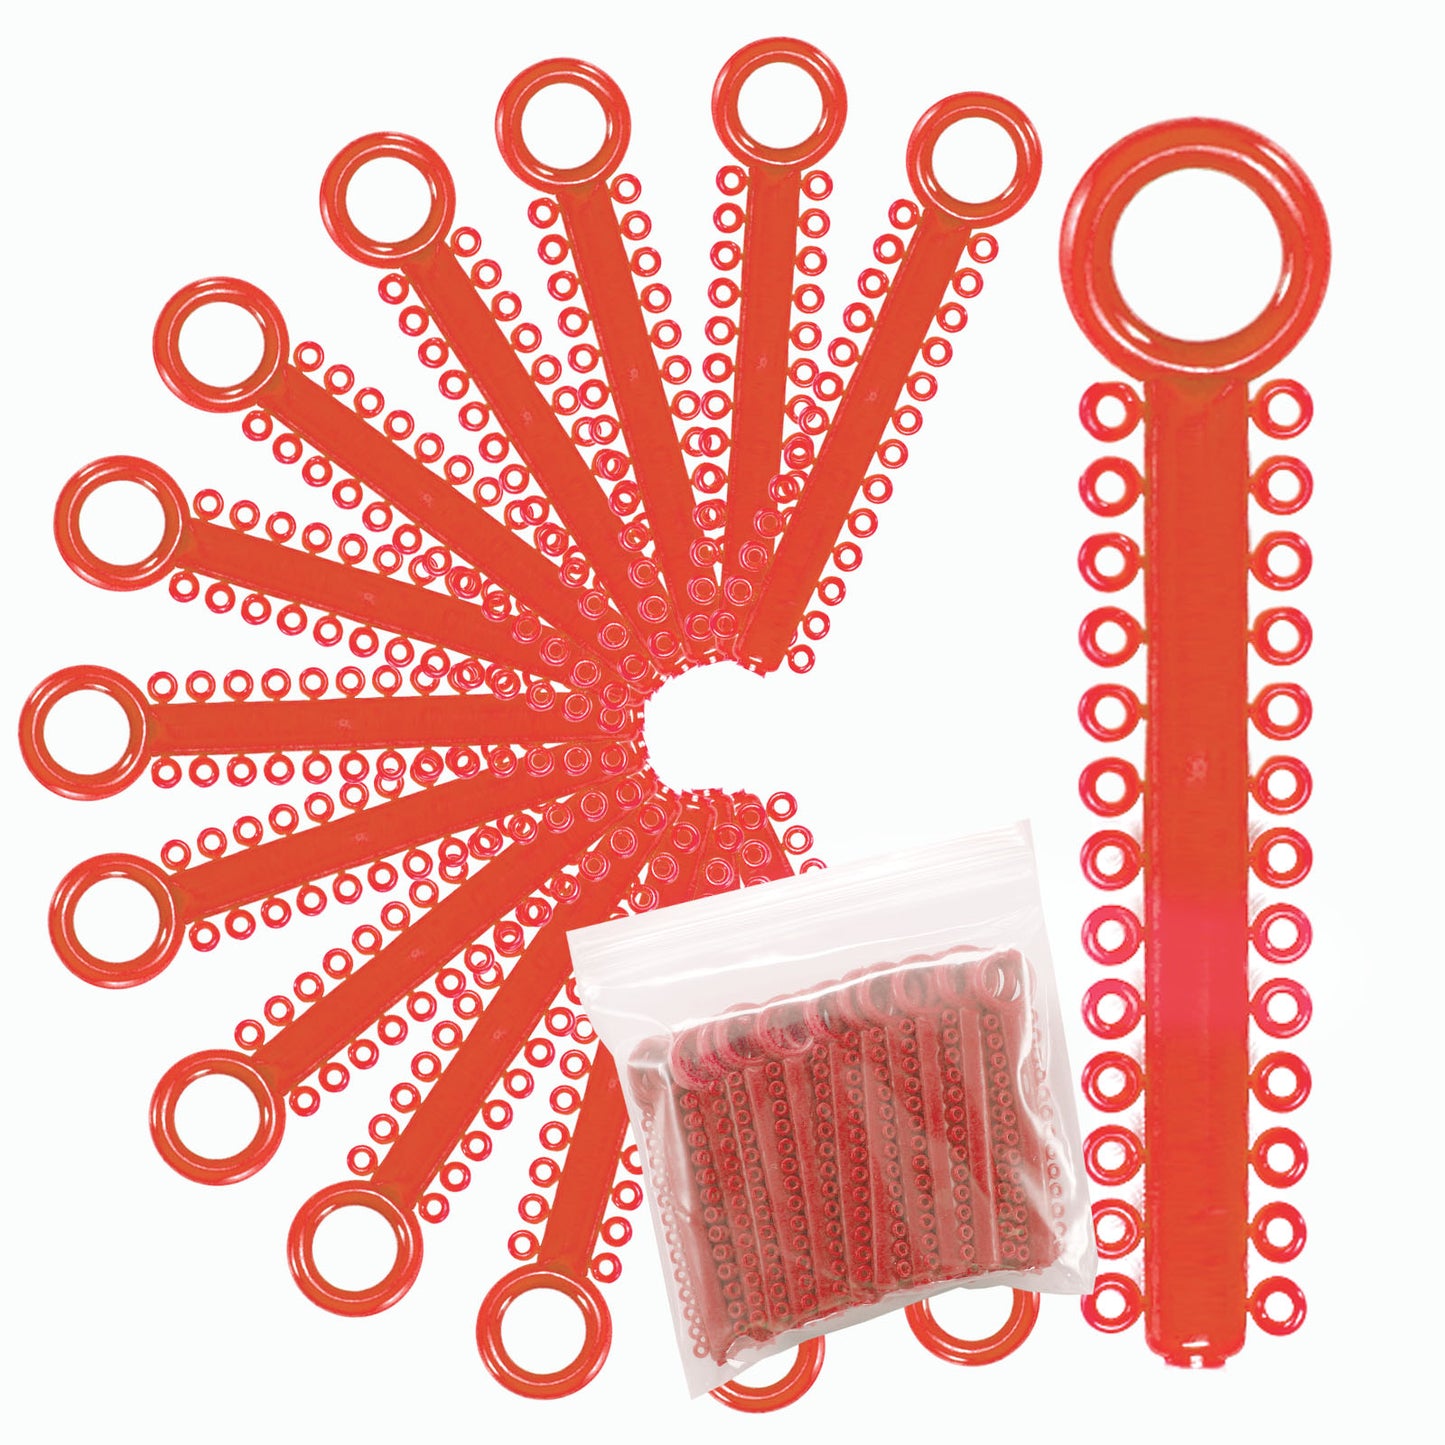 1040 Power Sticks Ligature Ties Orthodontic Ligature O-Ties, Elastic Ligature Bands, Elastic ties O-Rings Elastic Bands for Braces 26 ties on each stick